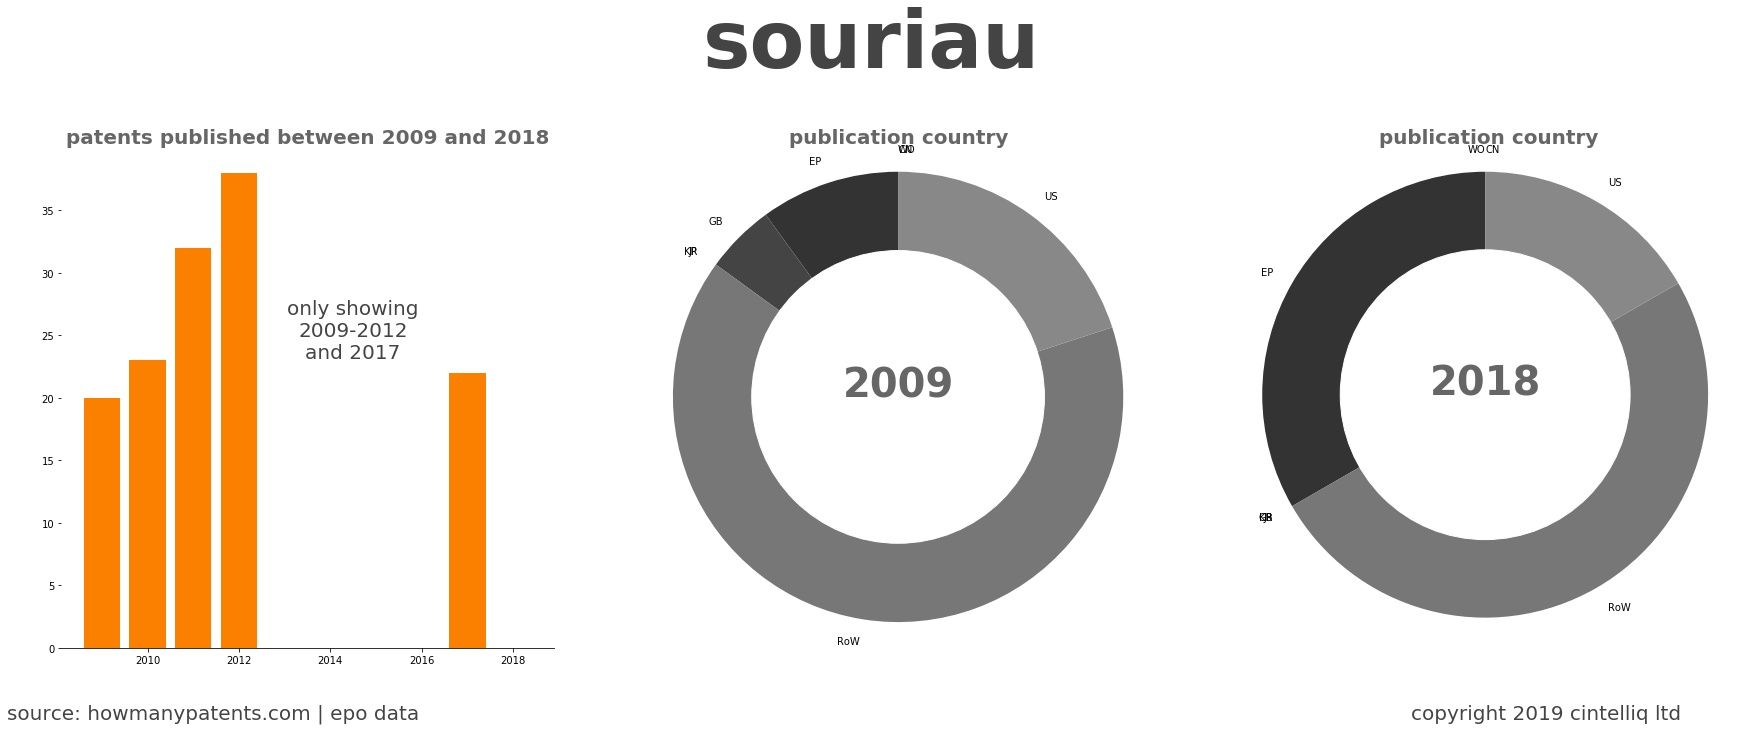 summary of patents for Souriau